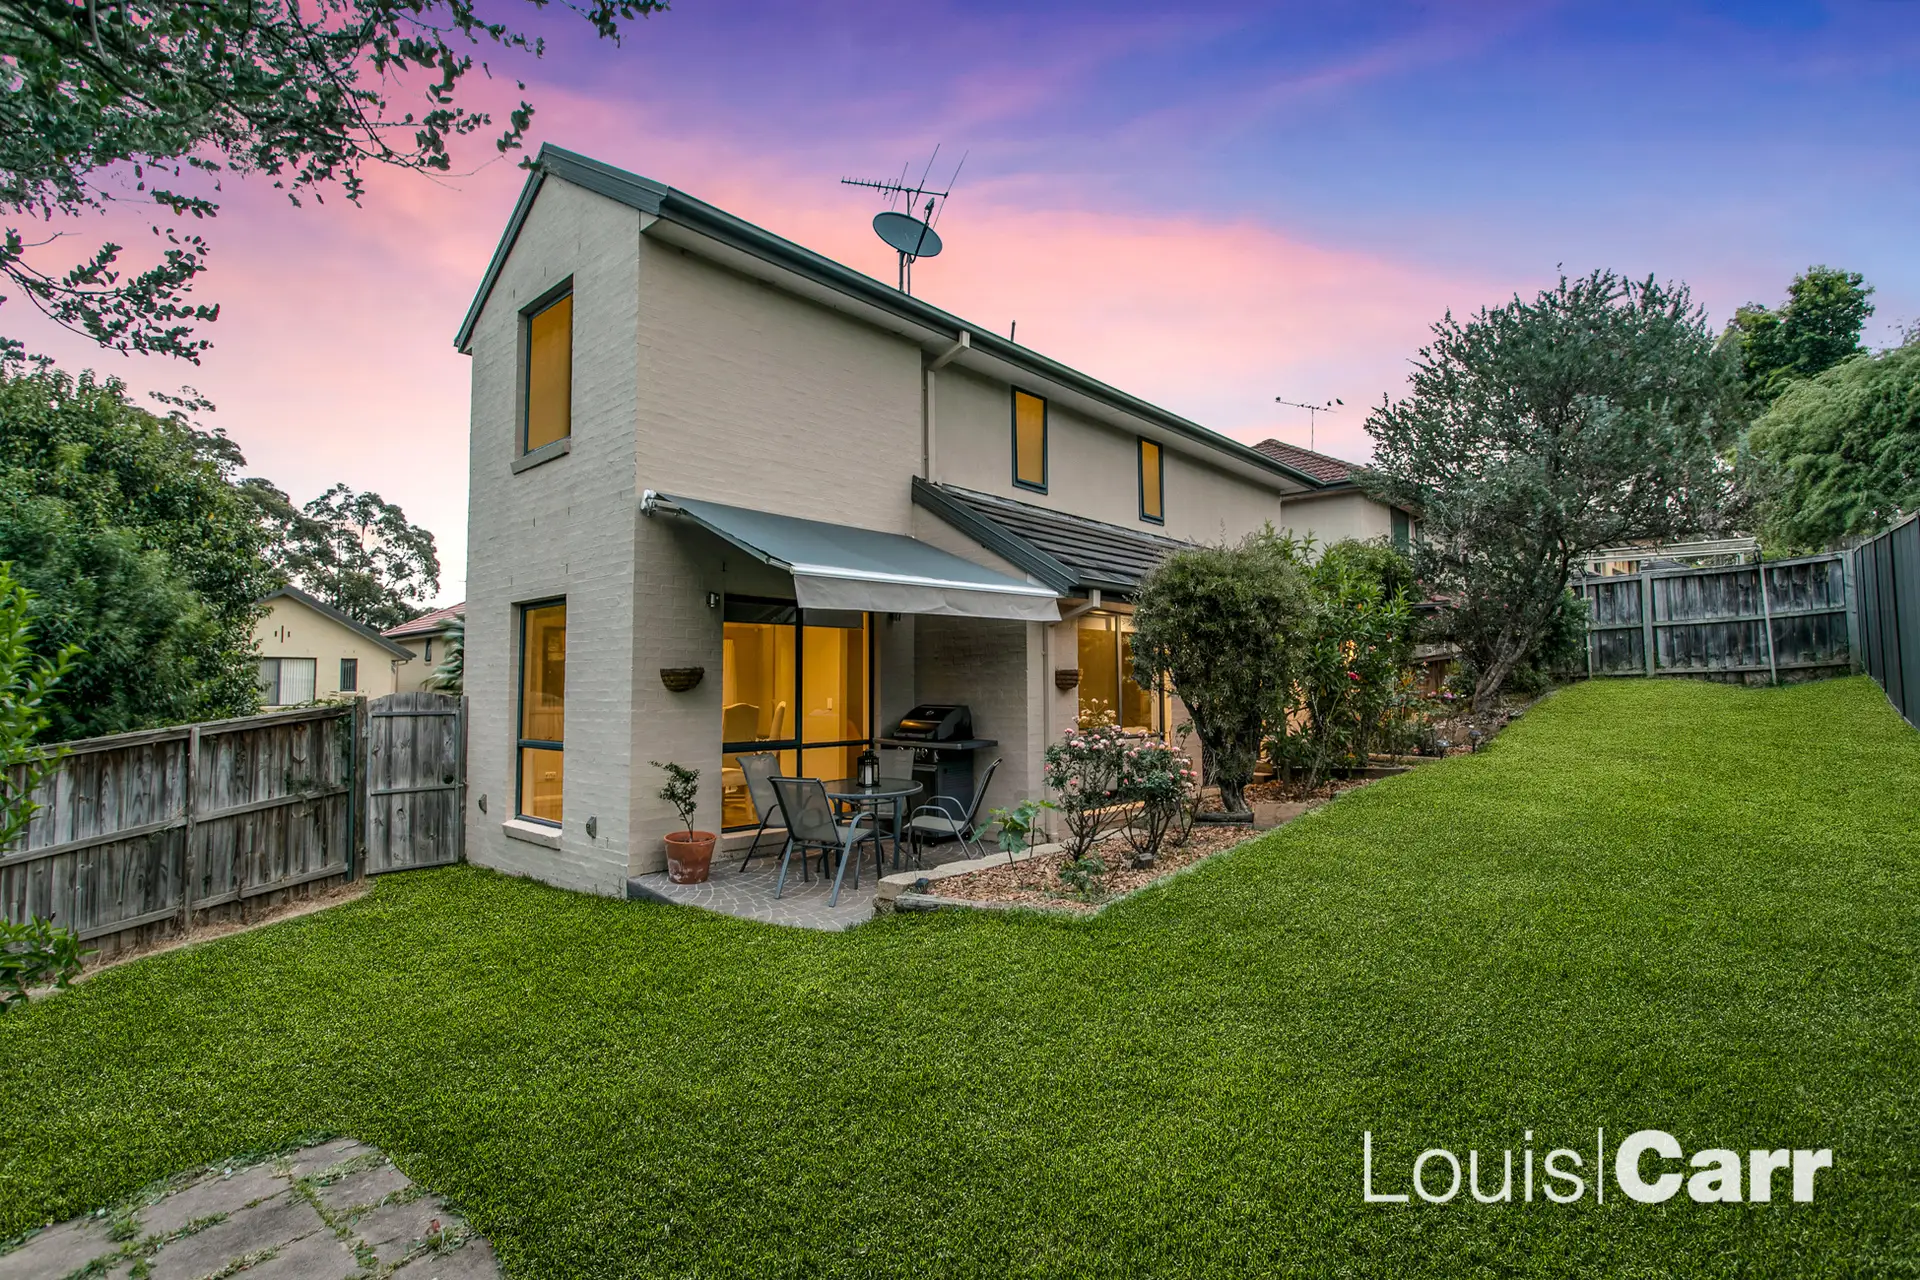 Photo #7: 7 Peartree Circuit, West Pennant Hills - Sold by Louis Carr Real Estate